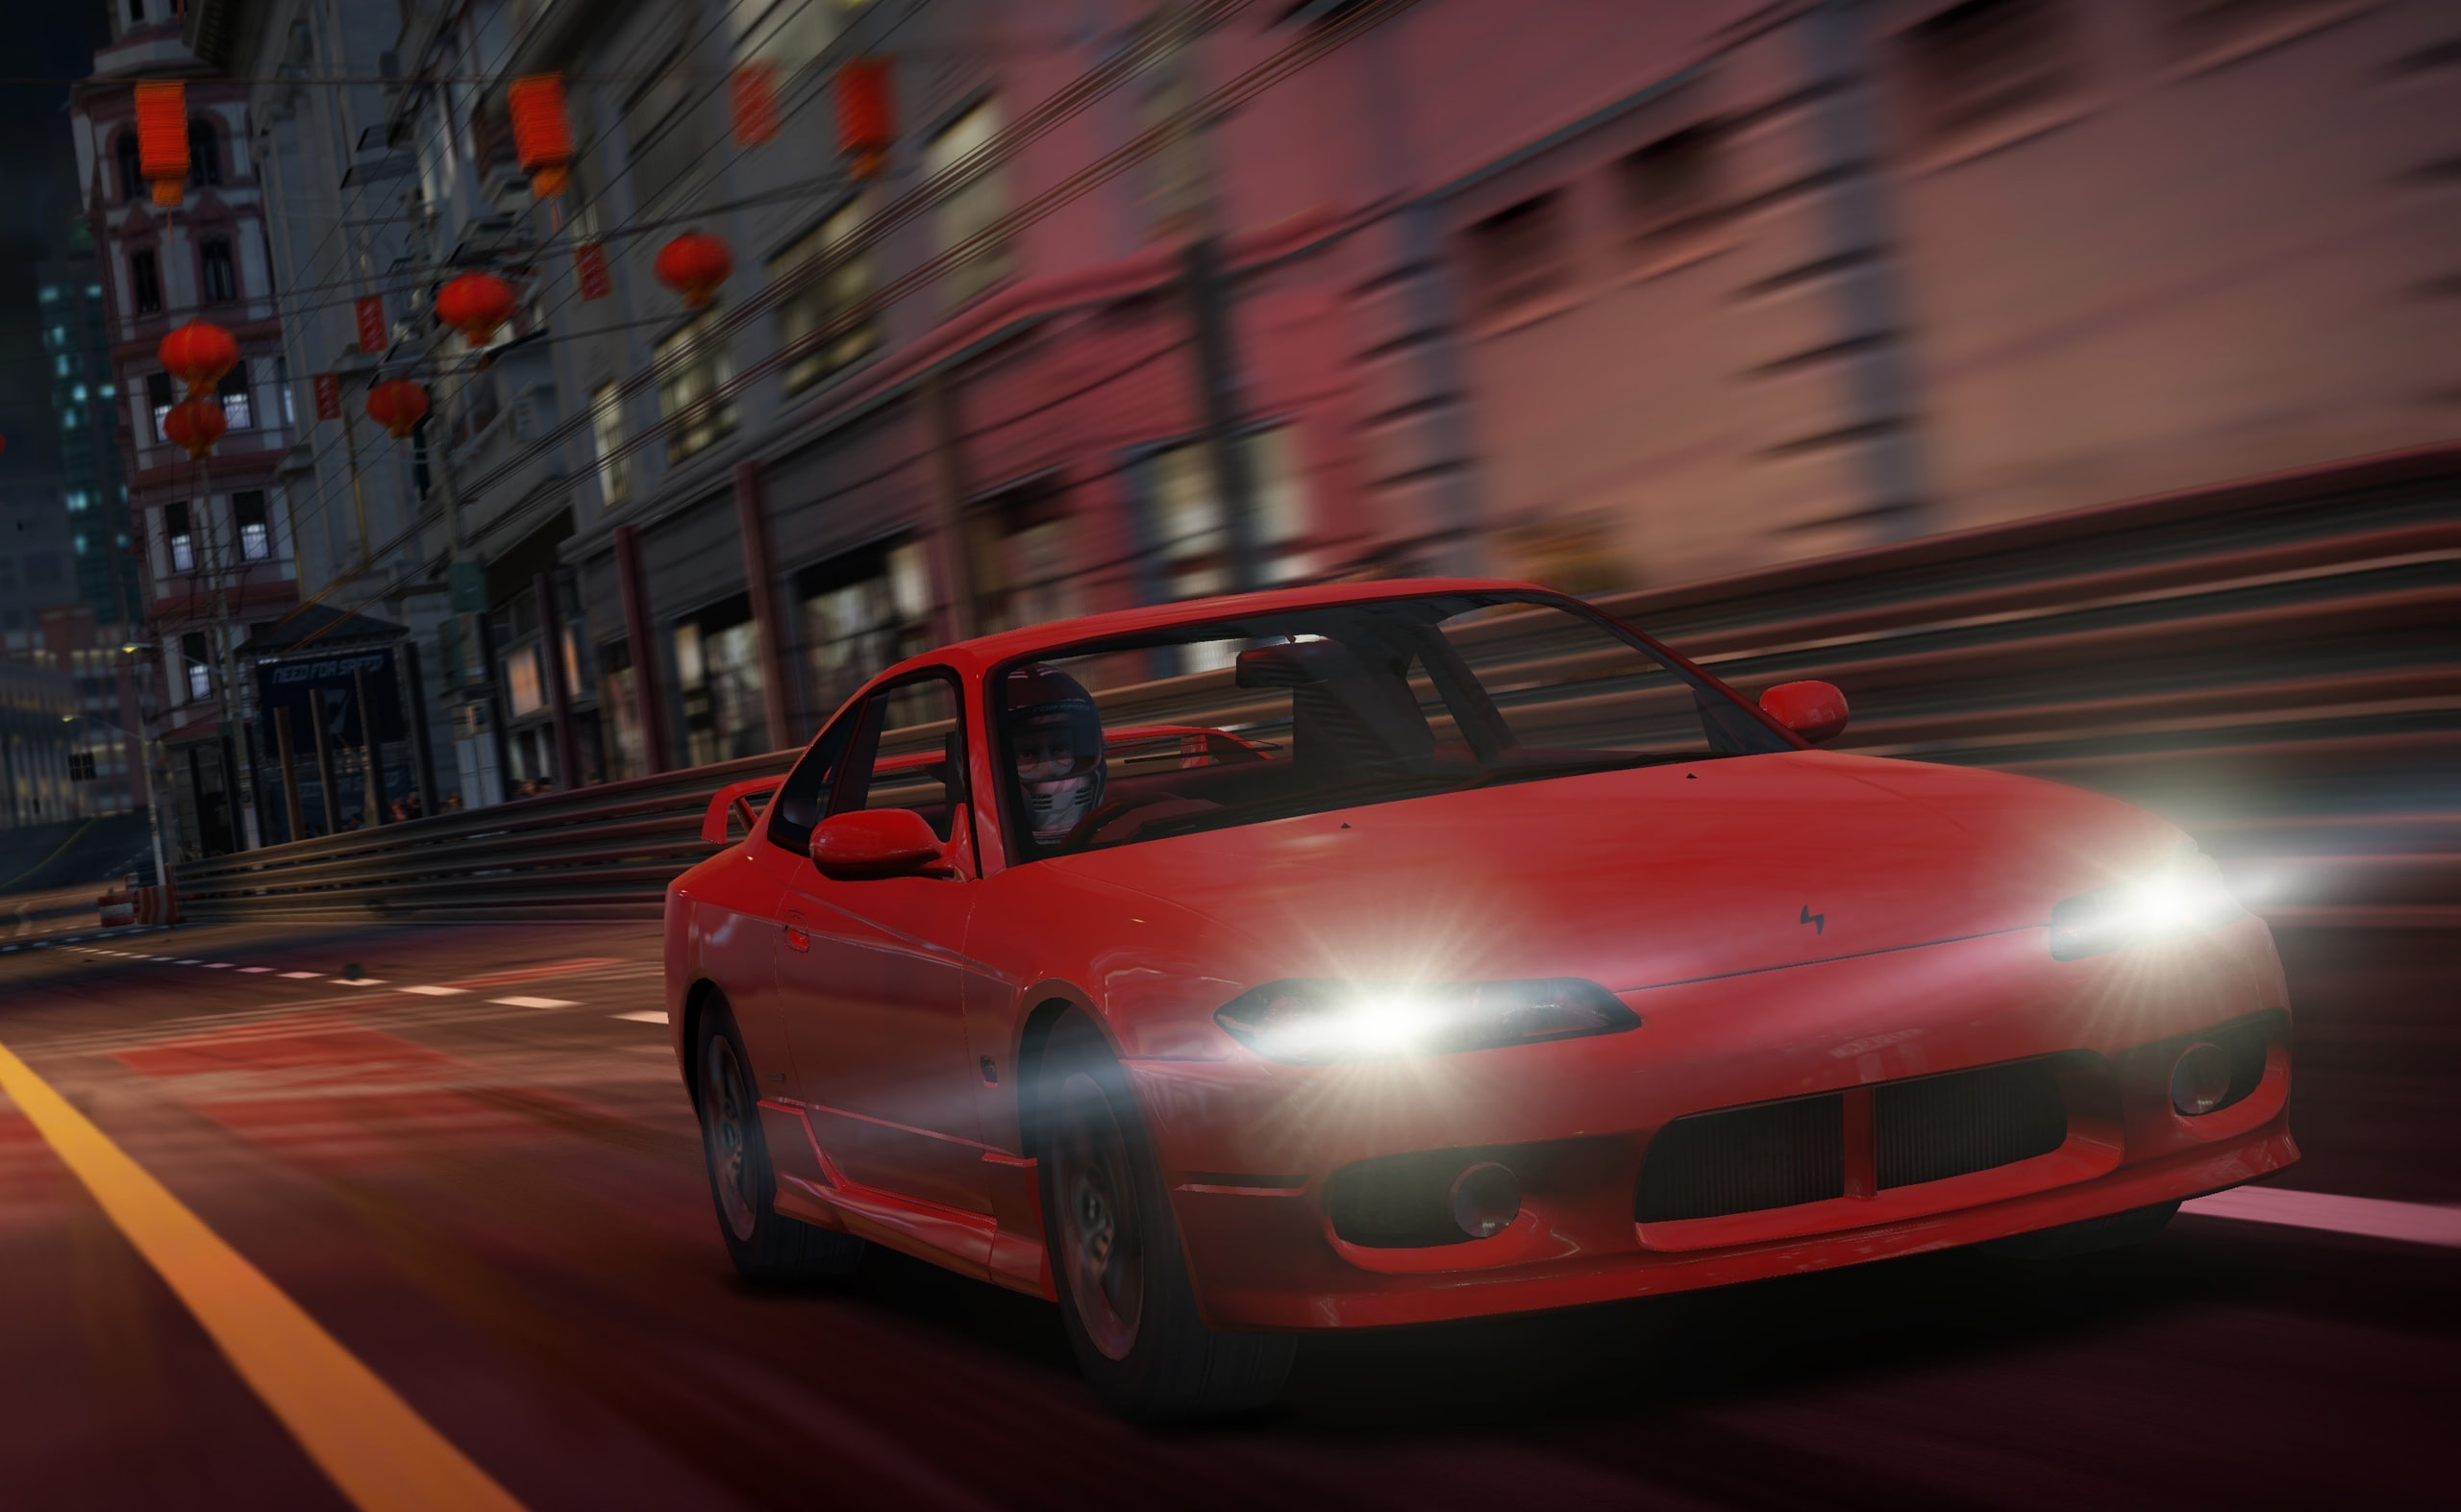 NFS Shift 2 Unleashed, Nissan S15 Silvia Spec R, red coupe, Games